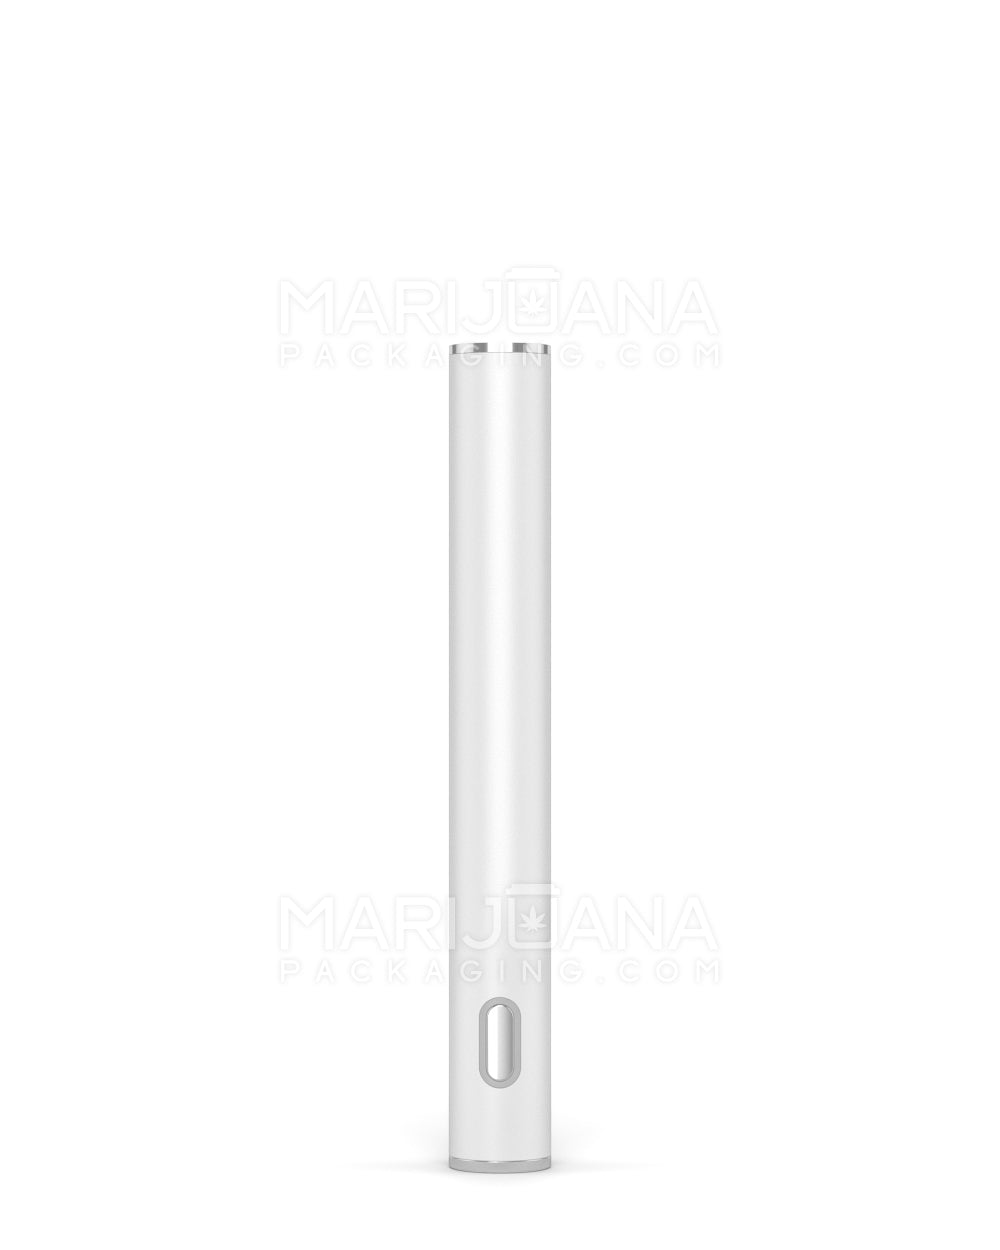 RAE | Instant Draw Activated Vape Battery | 320mAh - White - 640 Count - 2